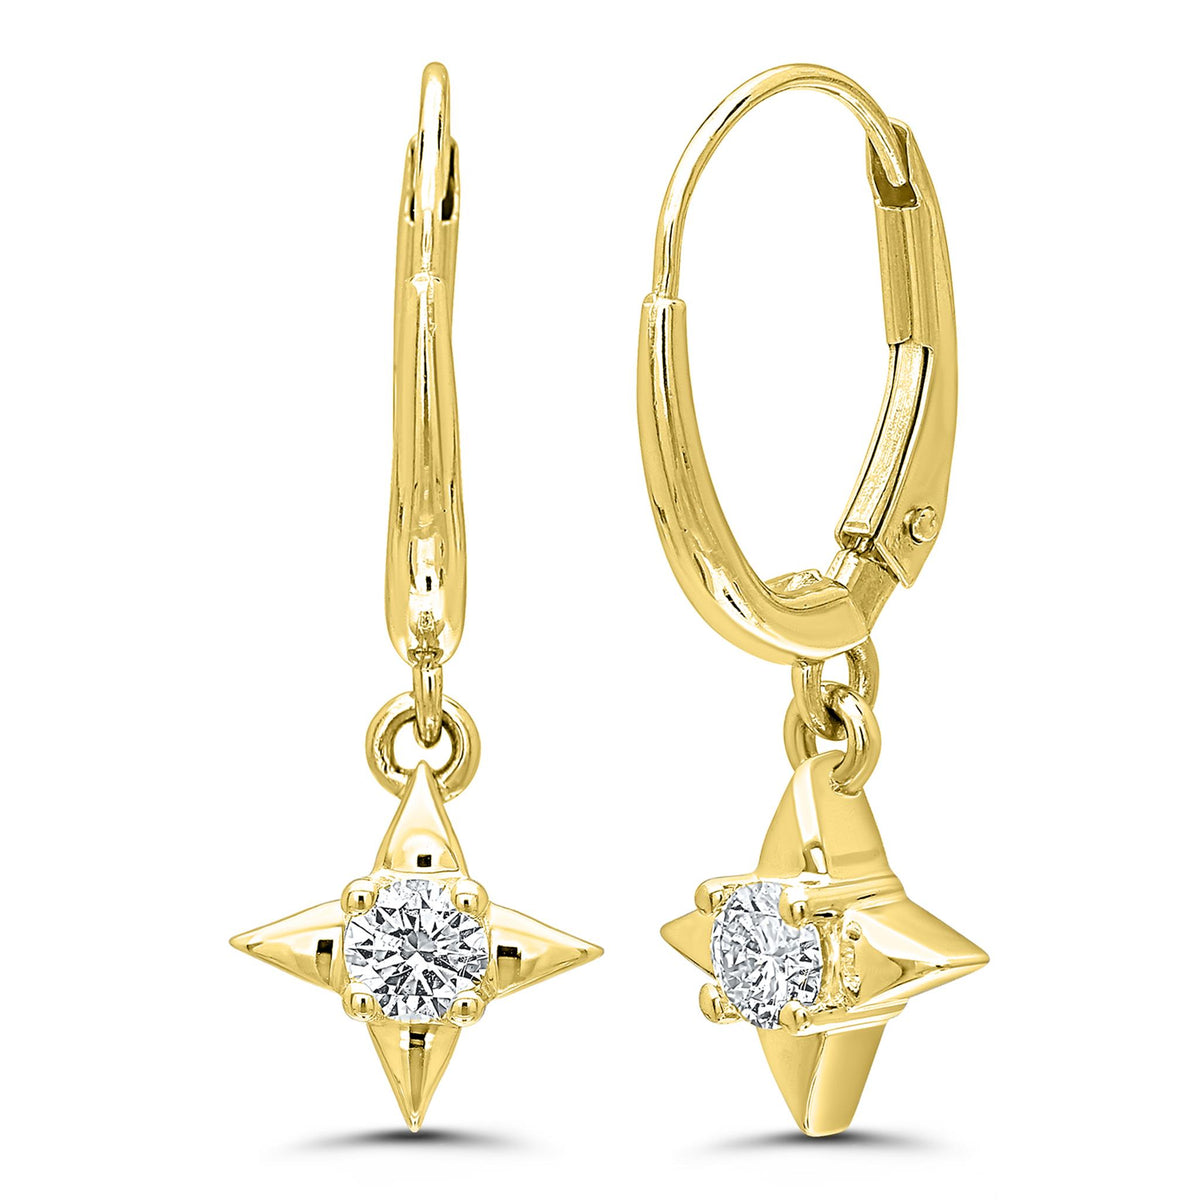 Star Of Hope 14Kt Yellow Gold Leverback Earrings With .25cttw Natural Diamonds